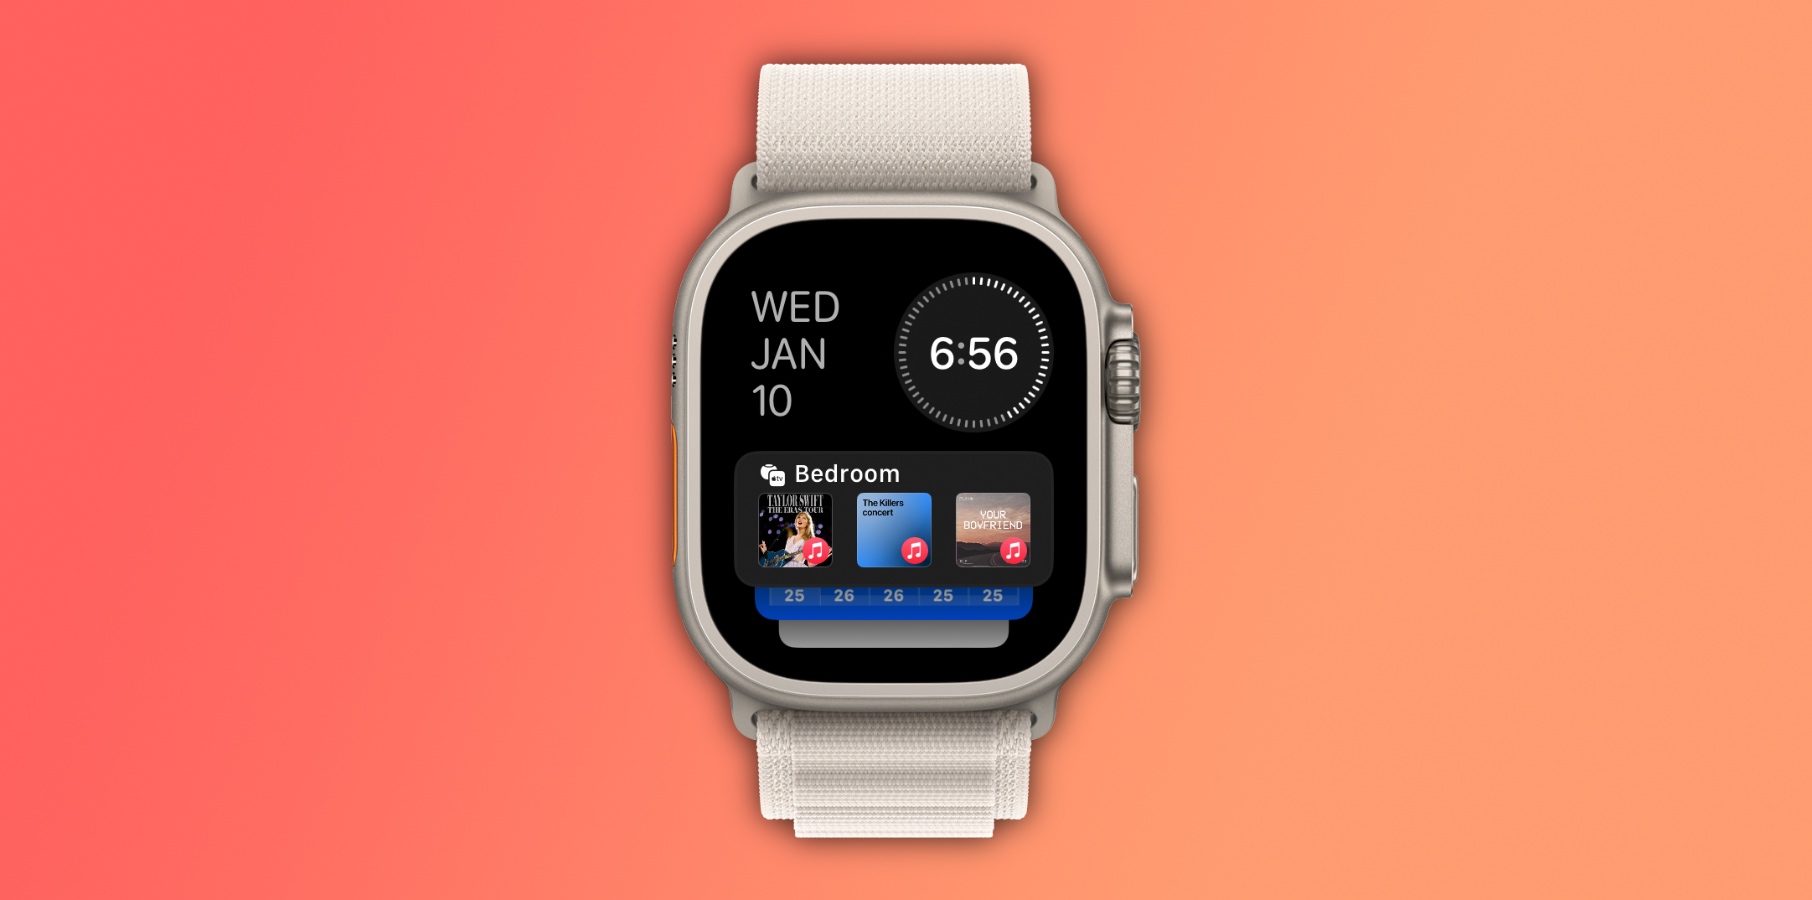 watchOS+11+includes+a+new+Vitals+app+that+lets+you+view+all+your+important+health+metrics